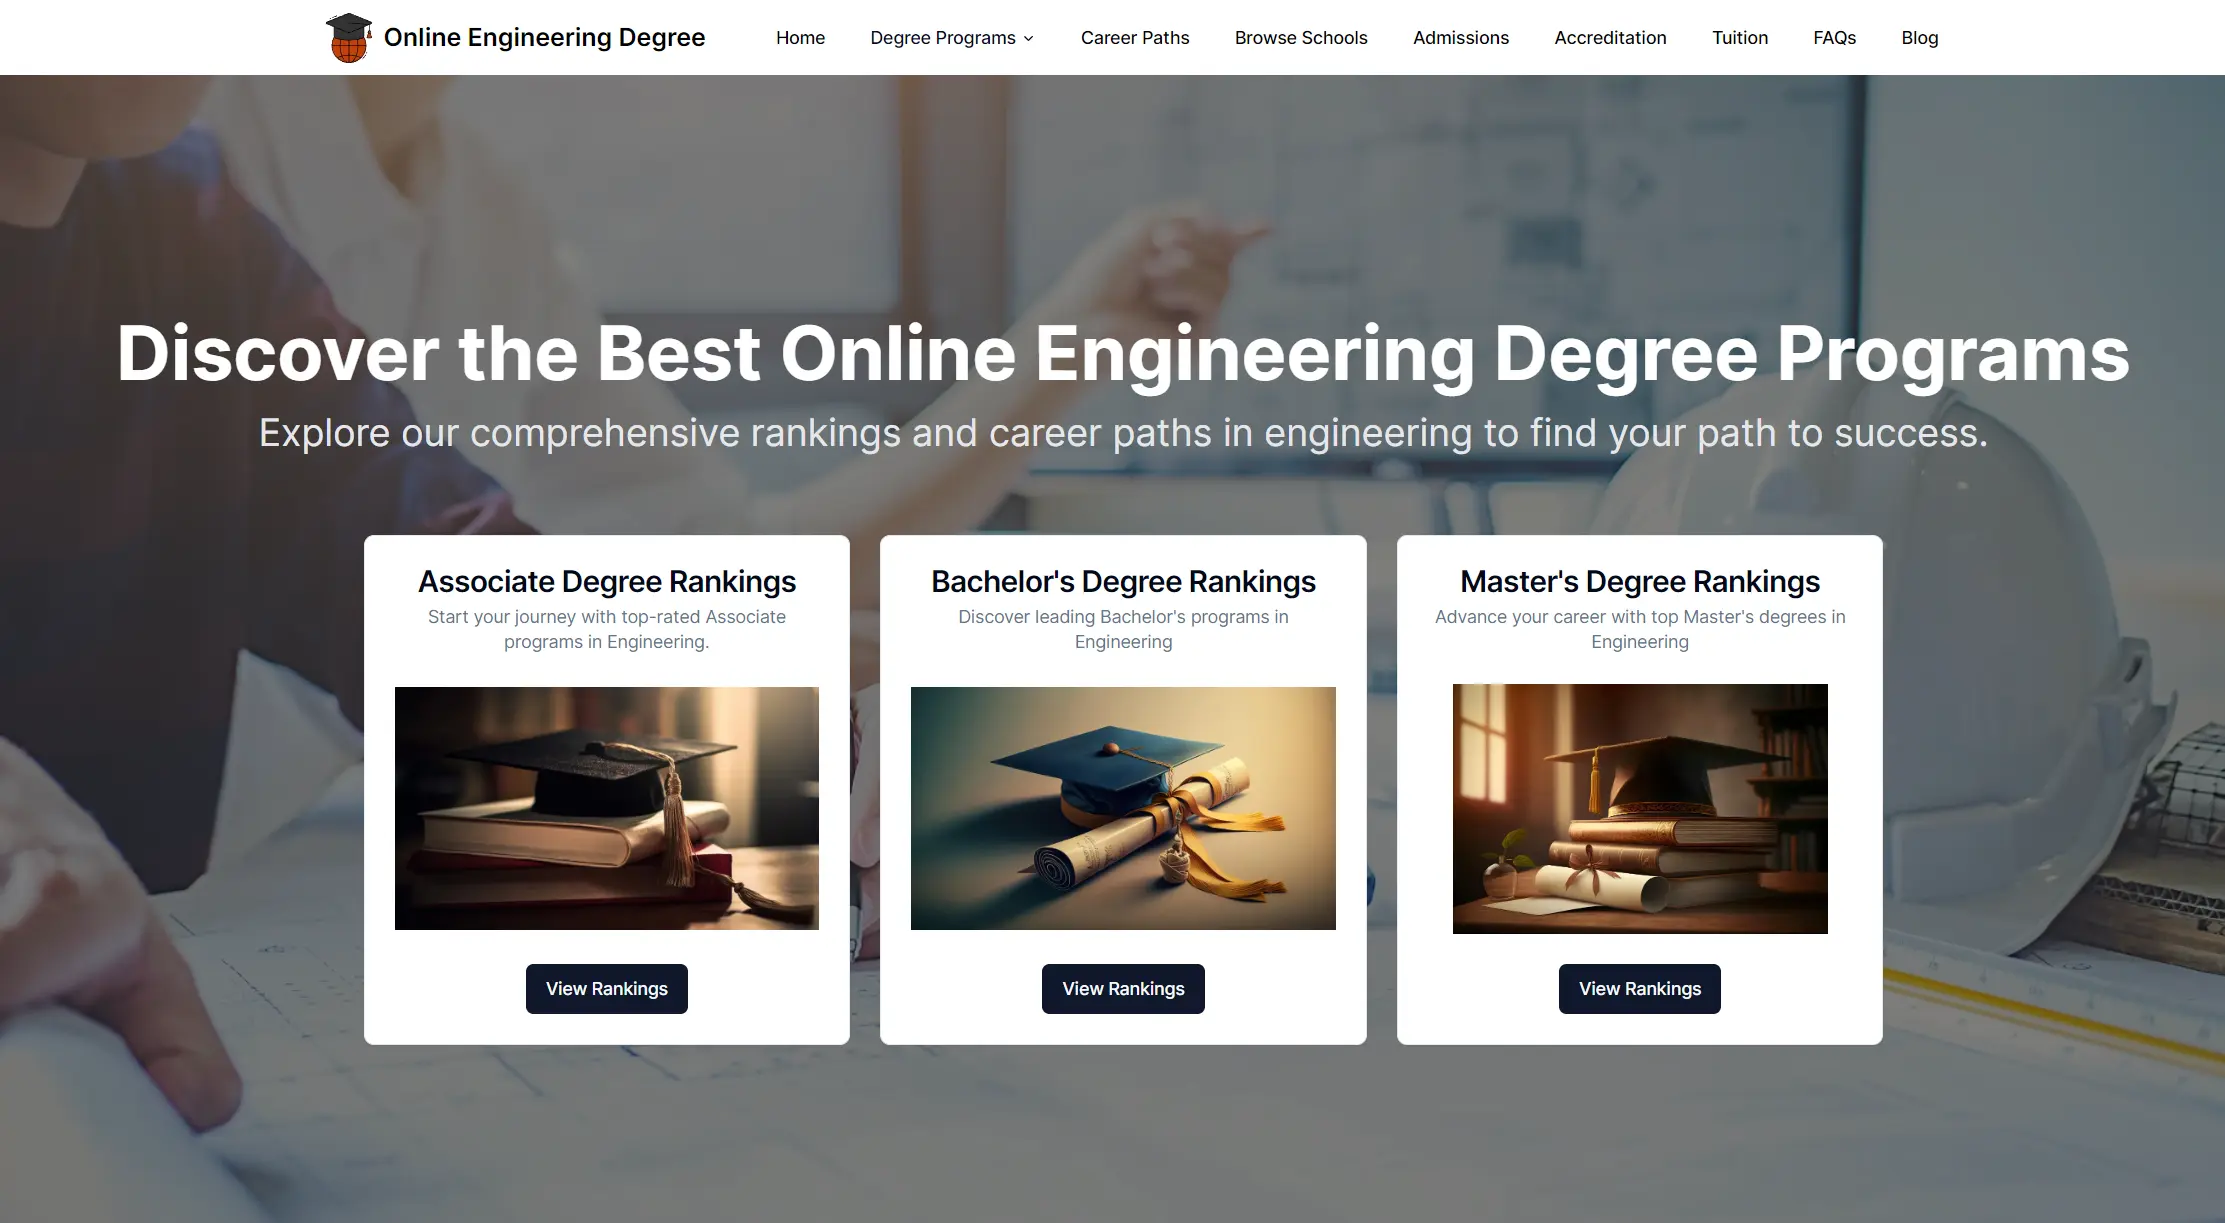 Online Engineering Degrees site thumbnail